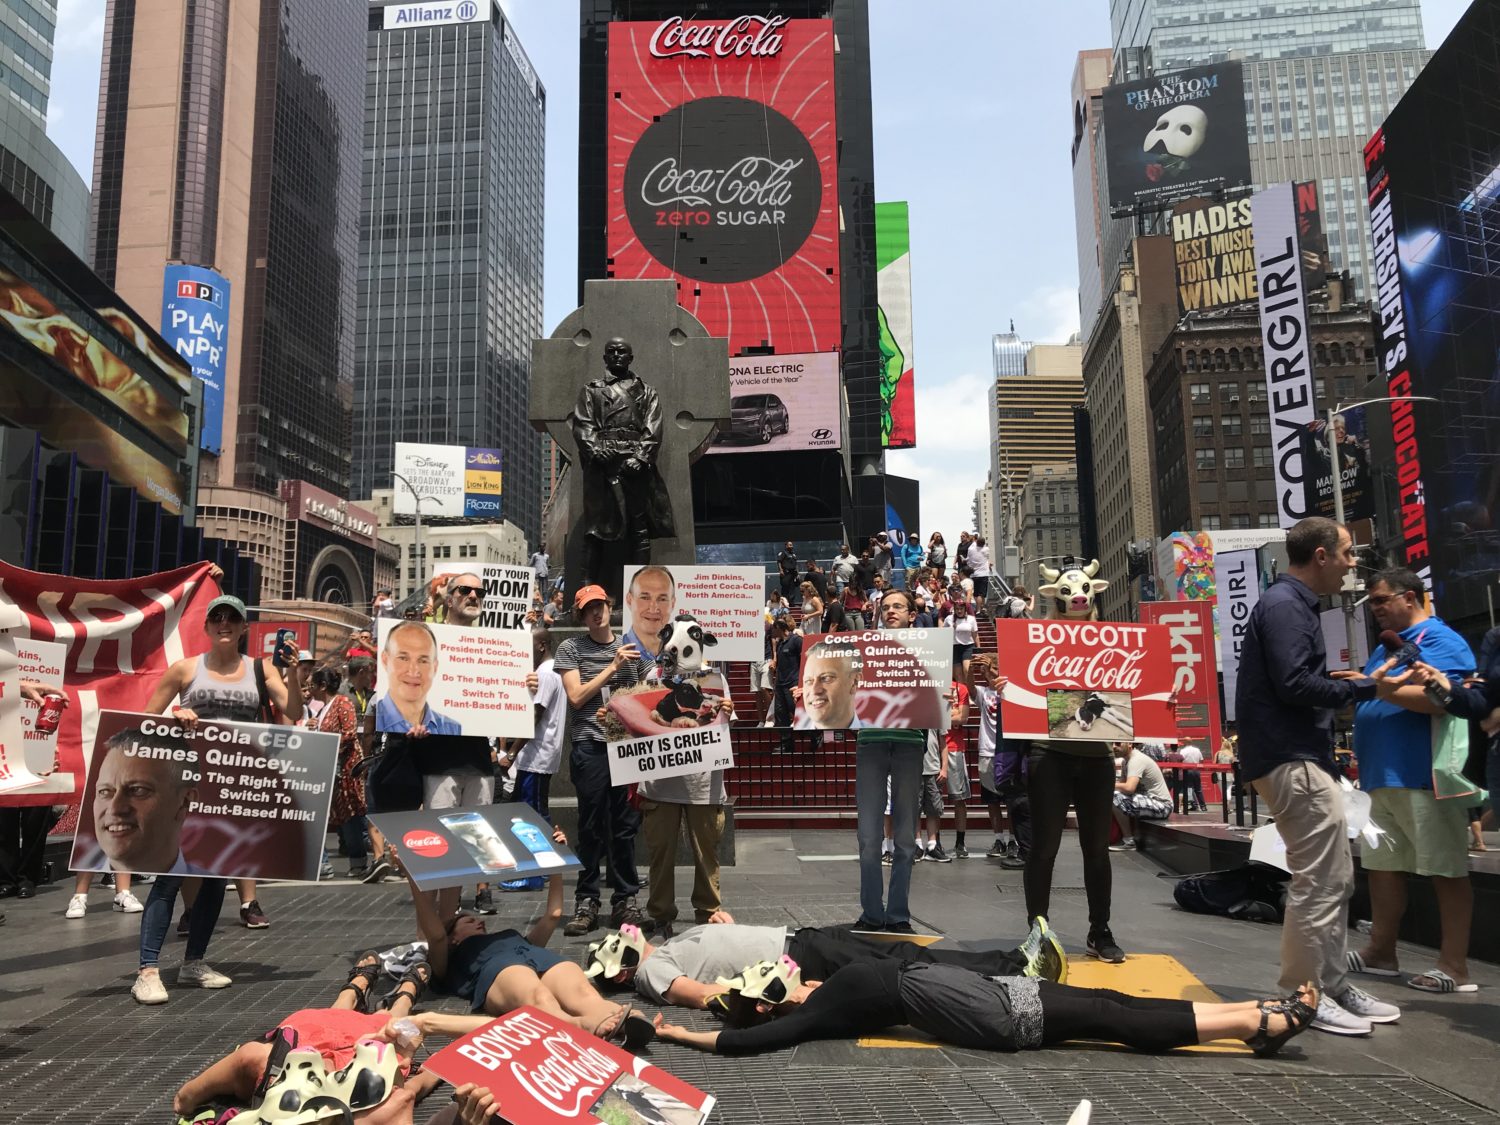 Mainstream media came out to document the Coca-Cola protest die-in!